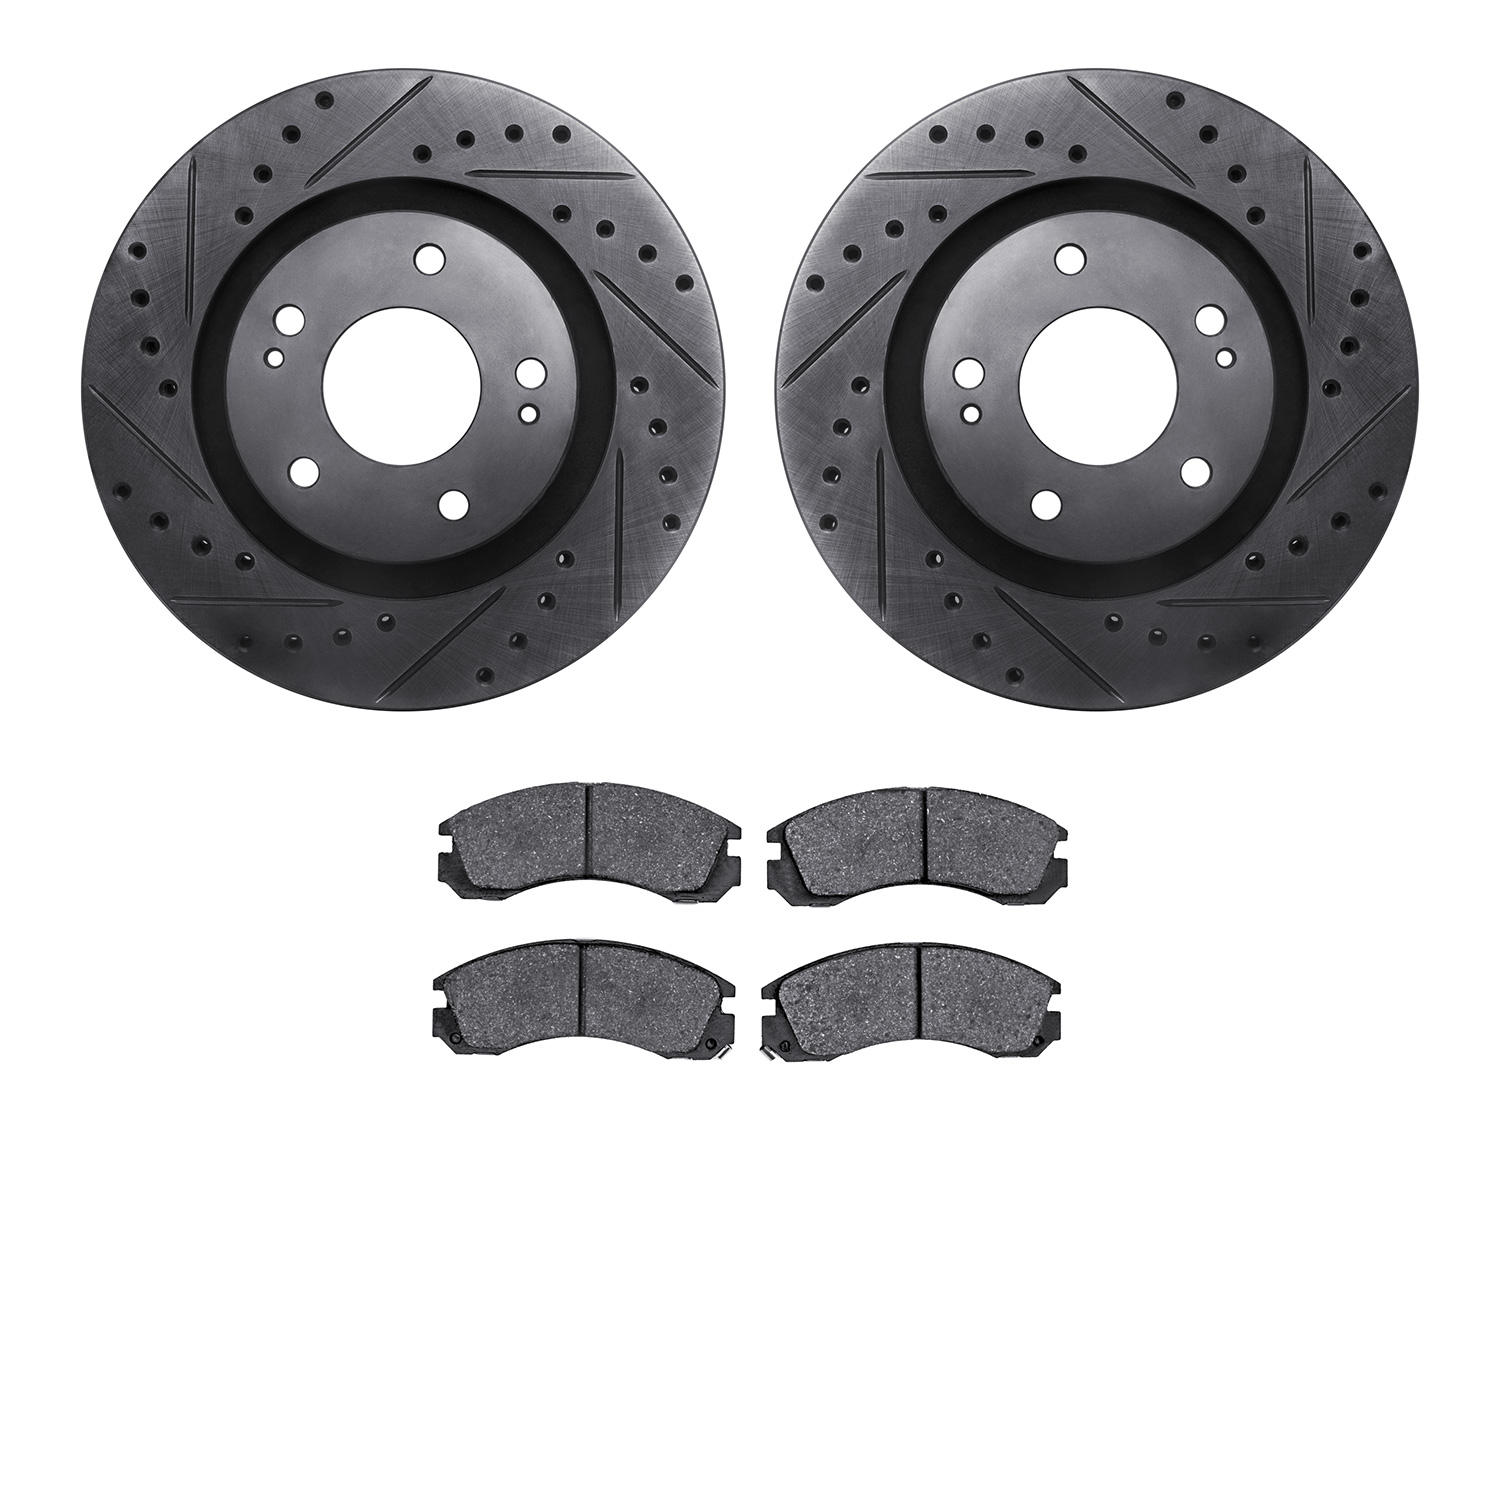 8302-72045 Drilled/Slotted Brake Rotors with 3000-Series Ceramic Brake Pads Kit [Black], Fits Select Mitsubishi, Position: Front